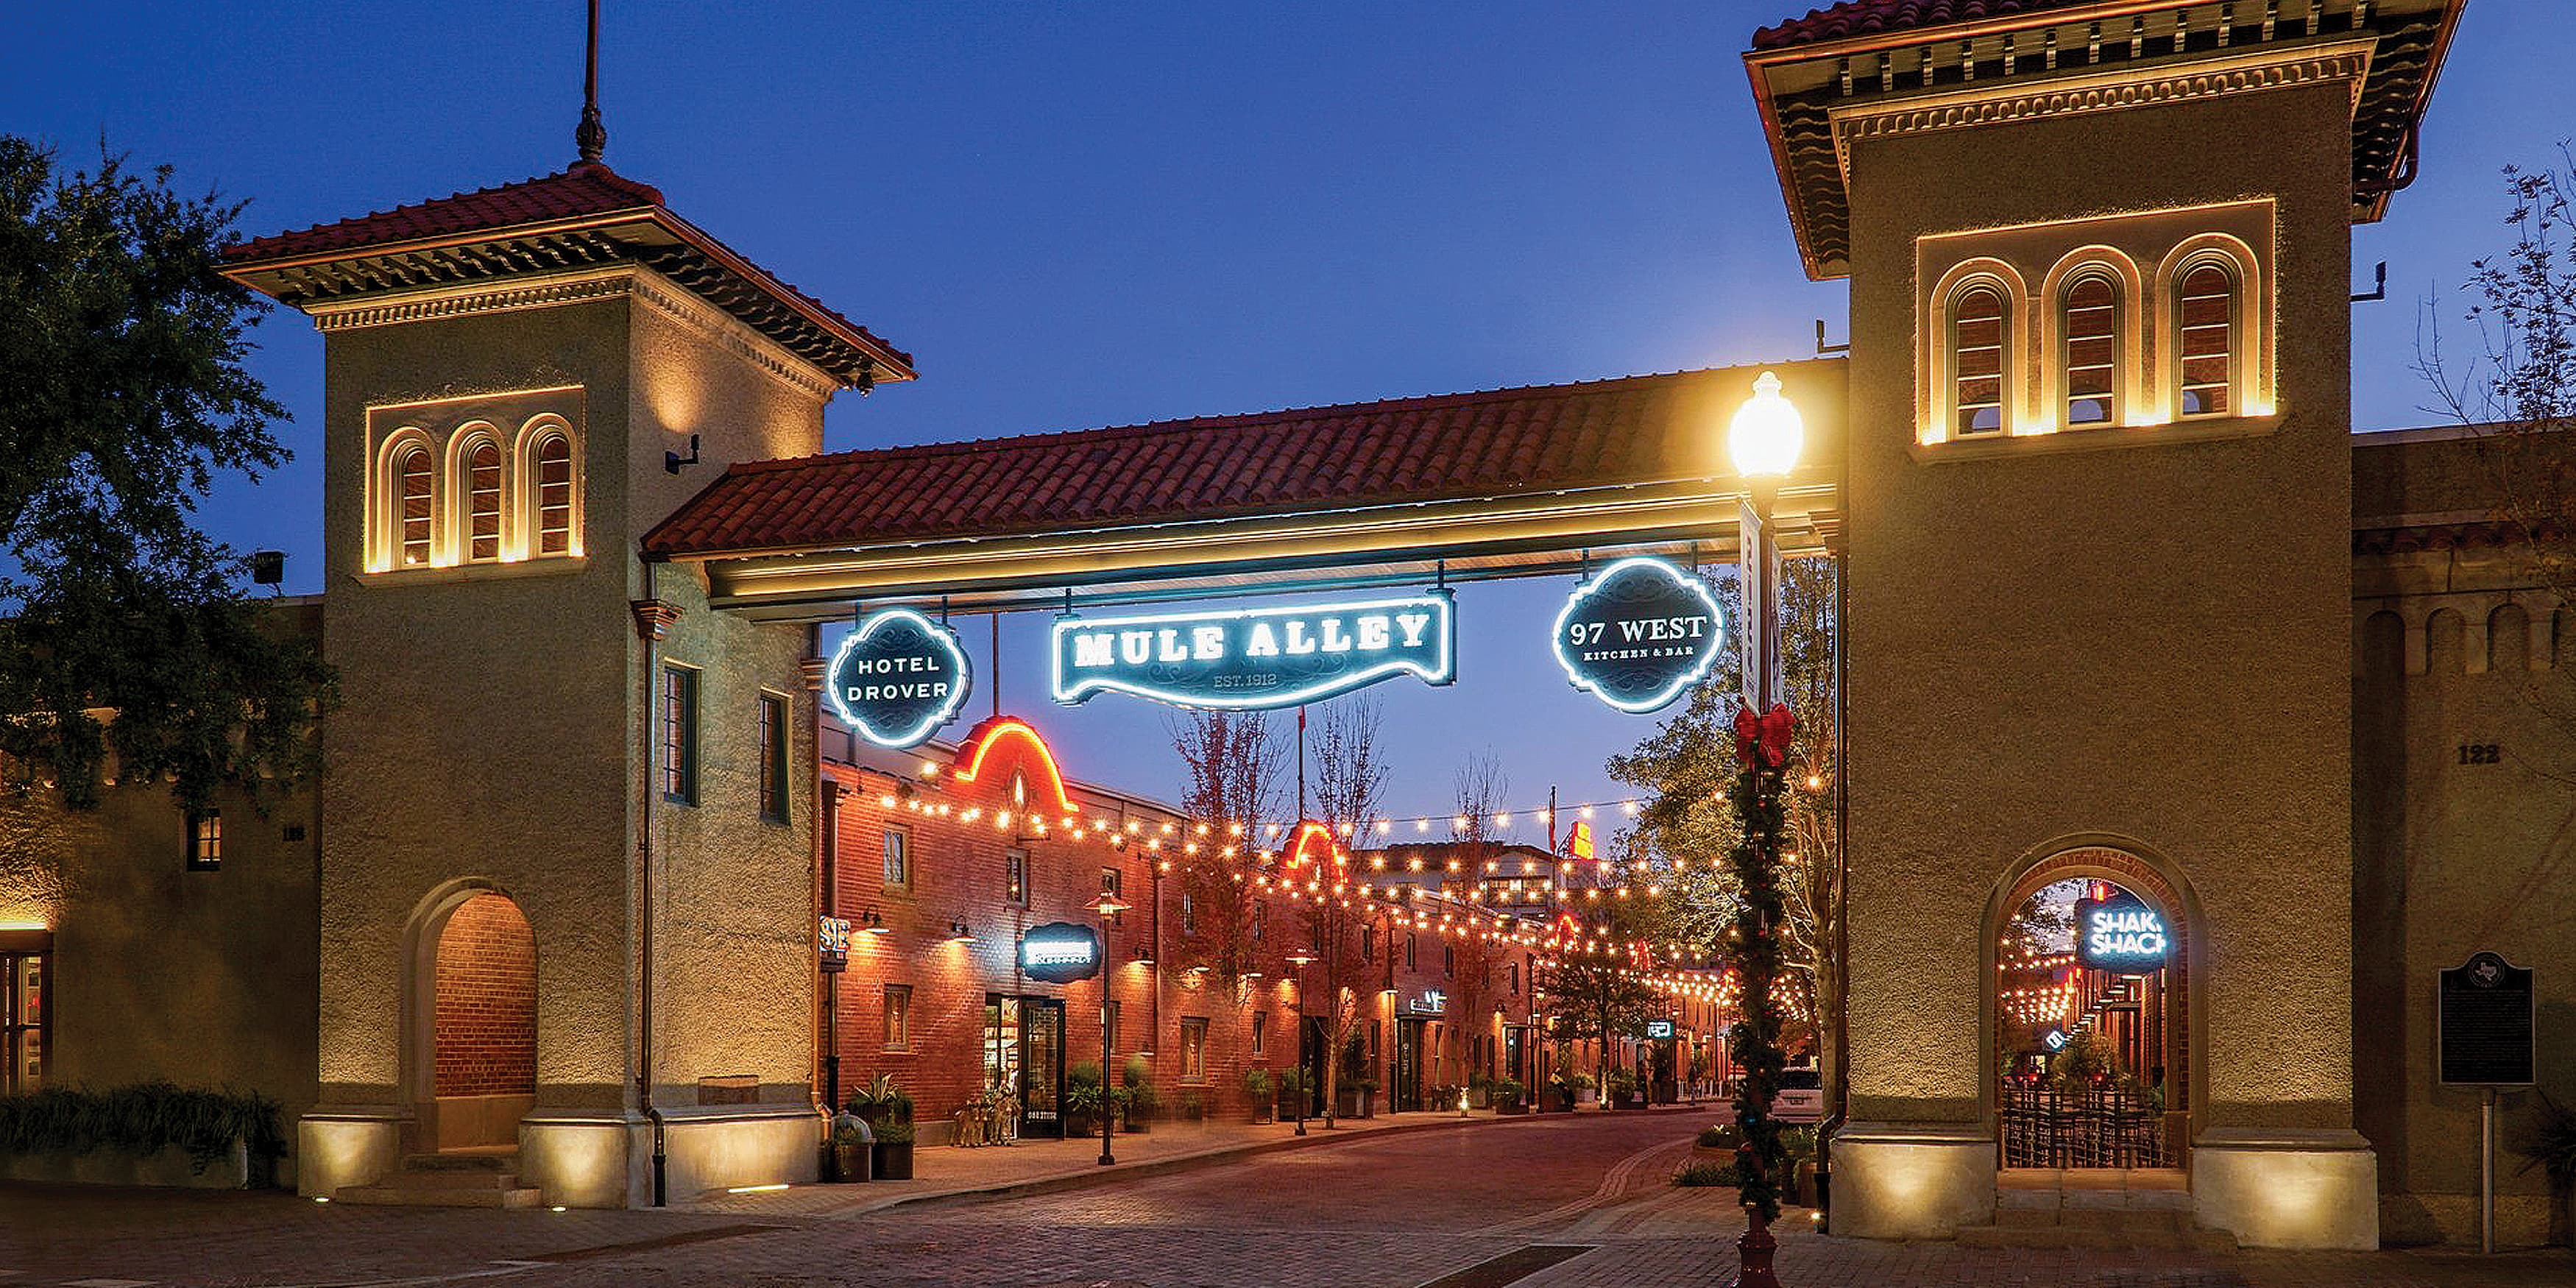 Nightime exterior shot of The Drover Hotel in Fort Worth, Texas overhead identity